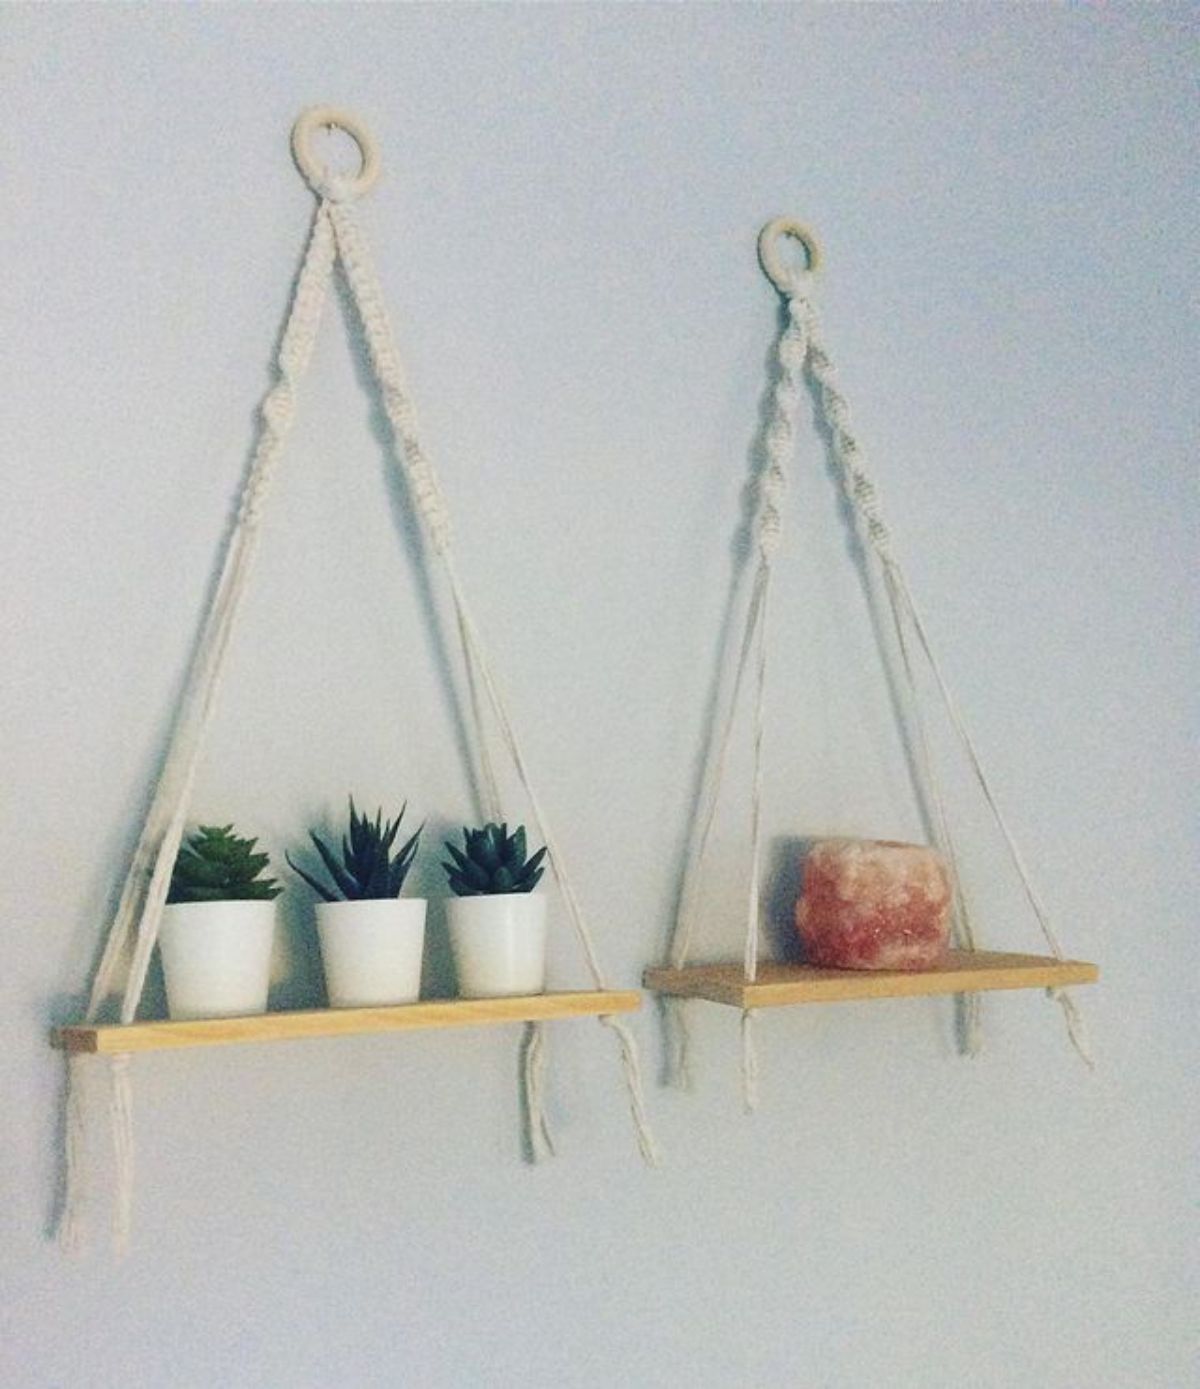 DIY Affordable Macrame Shelves with plants in pots and a fragrance candle.